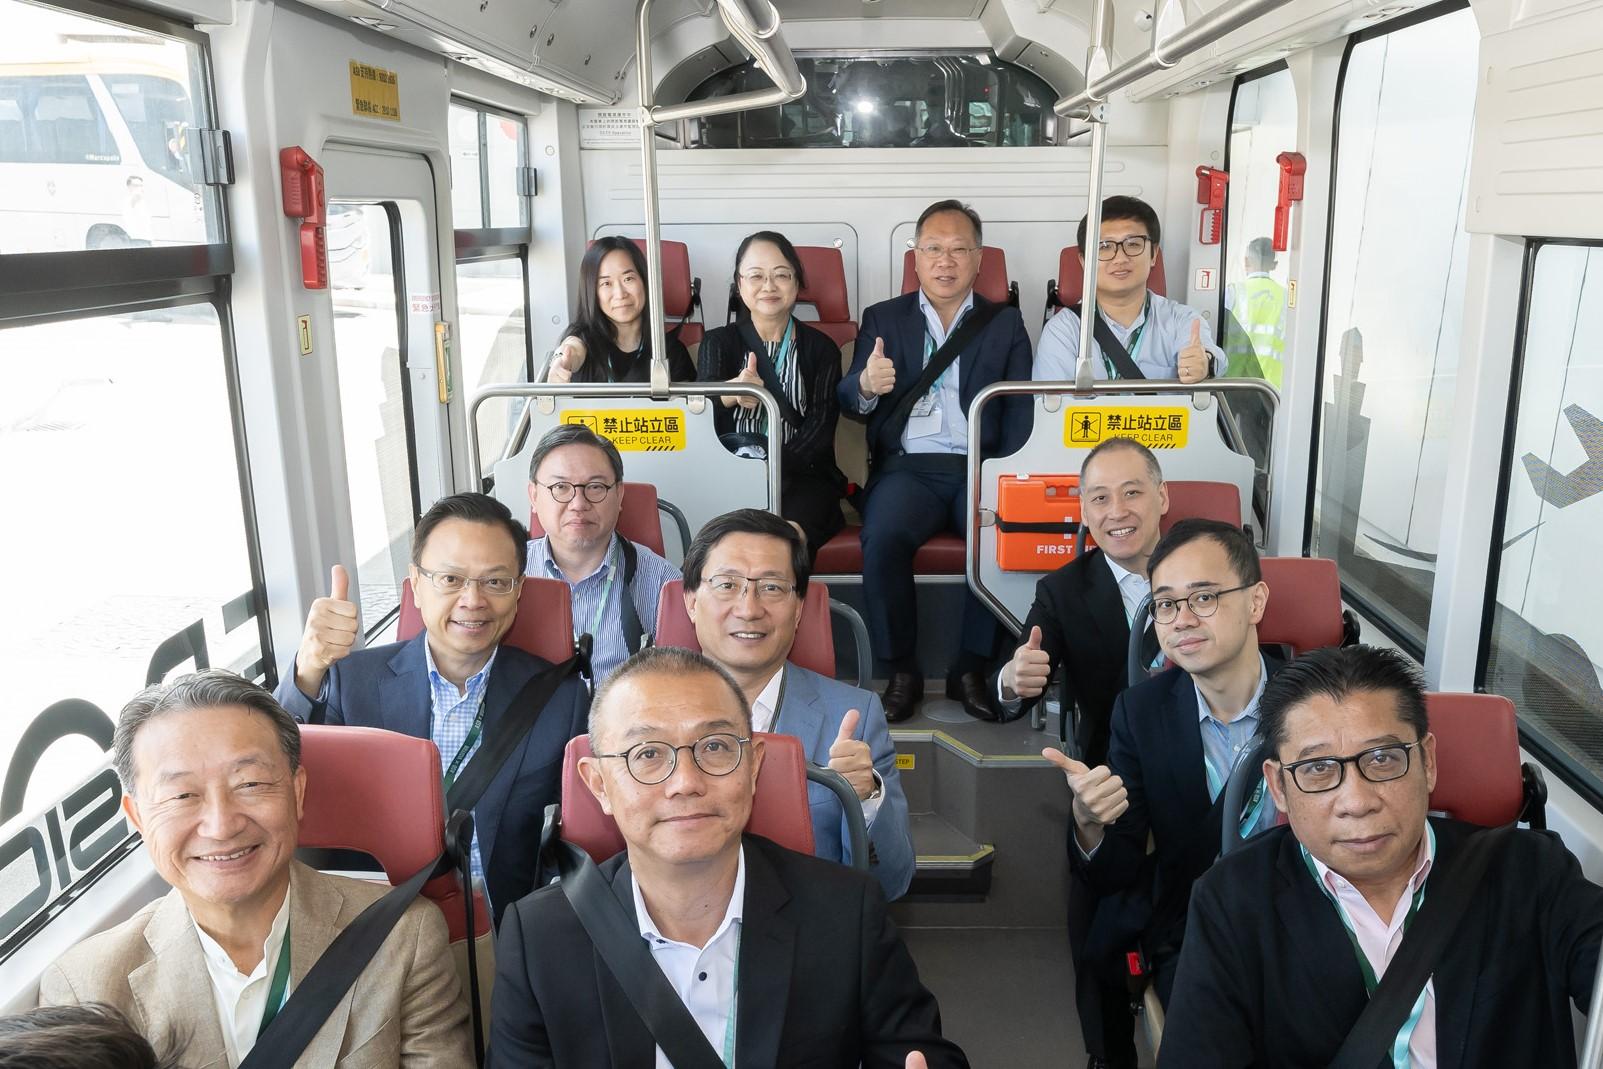 The Legislative Council (LegCo) Panel on Economic Development visited the Hong Kong International Airport (HKIA) today (July 11). Photo shows LegCo Members taking a ride on the autonomous vehicle and receiving a briefing by the representatives of Airport Authority Hong Kong on the operation of autonomous vehicles at HKIA.